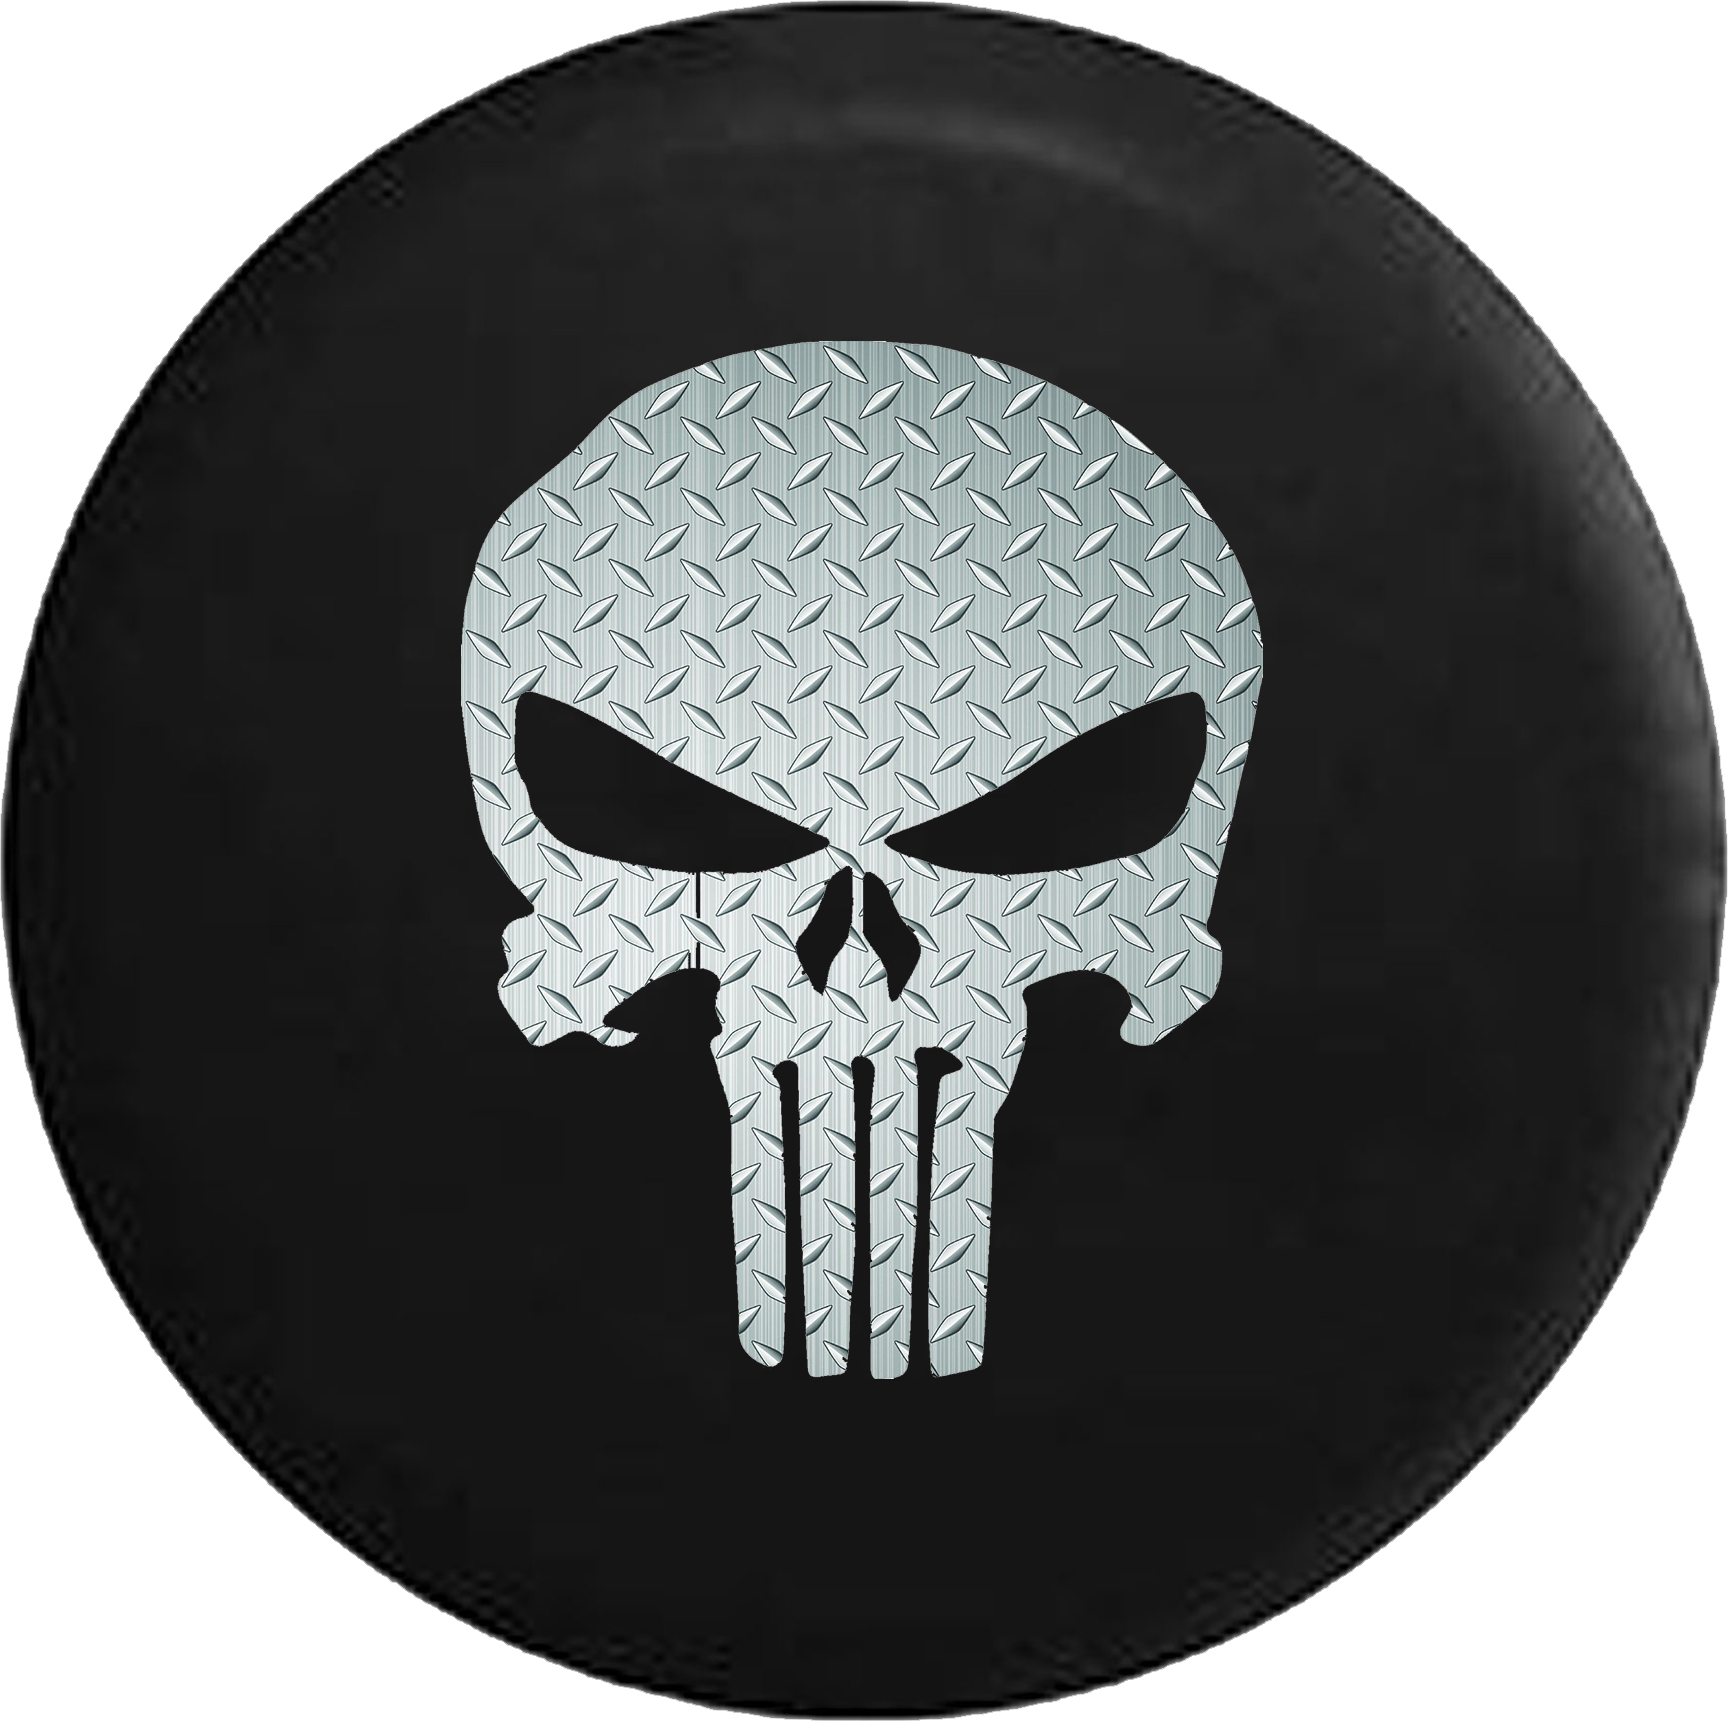 Tire Cover PRO Brushed Steel Diamond Plate American Patriot Punisher  Skull RV Camper Spare Tire Cover-BLACK-CUSTOM SIZE/COLOR/INK – TireCoverPro